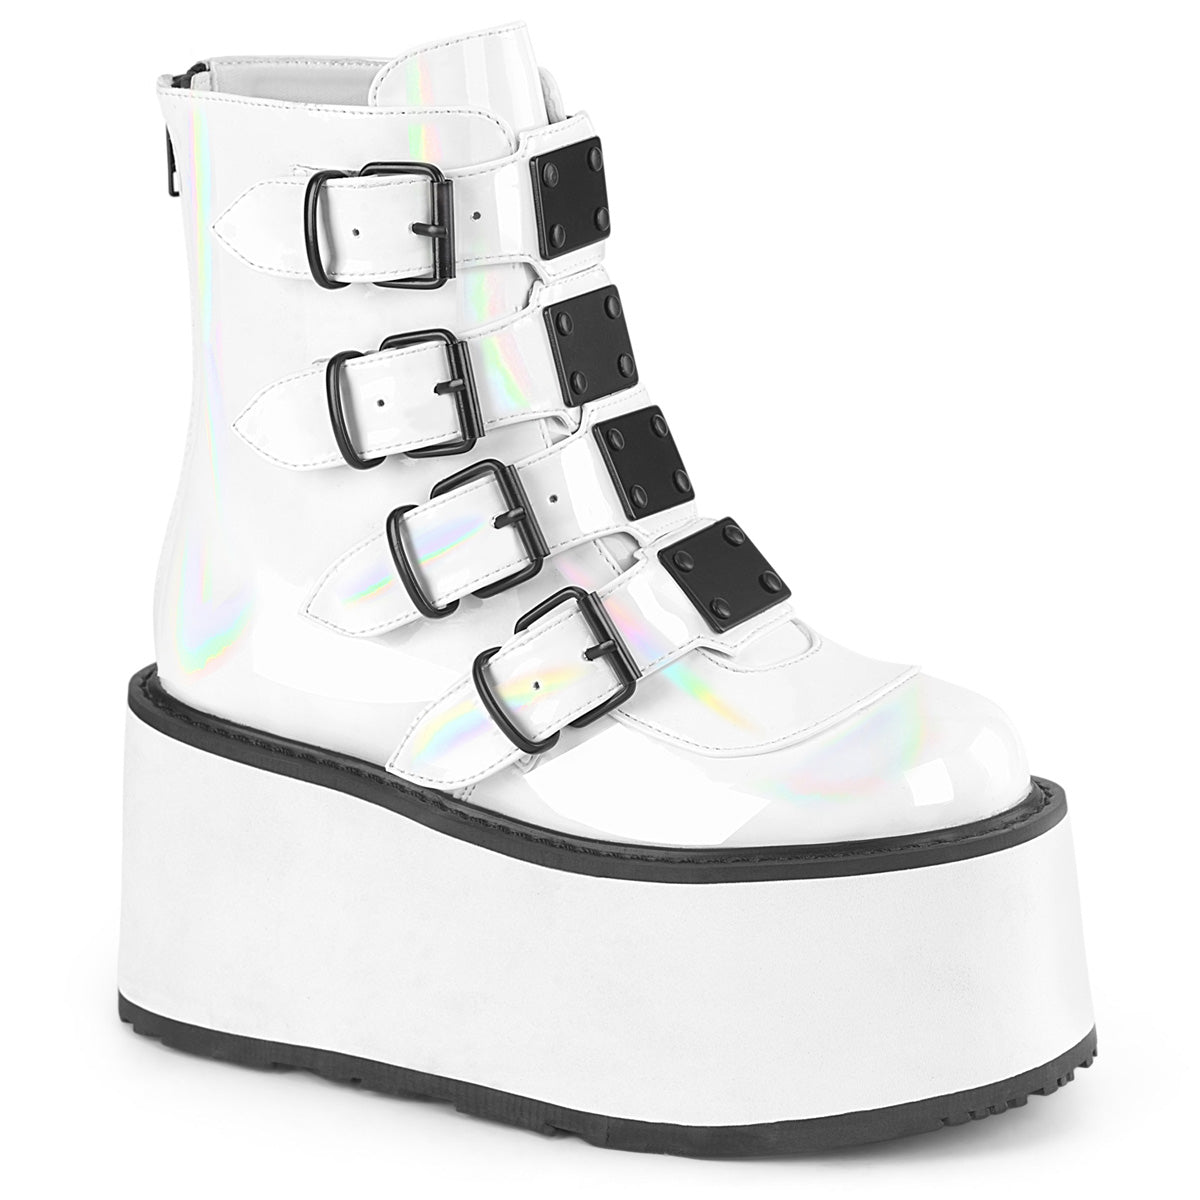 DemoniaCult  Ankle Boots DAMNED-105 Wht Holo Pat